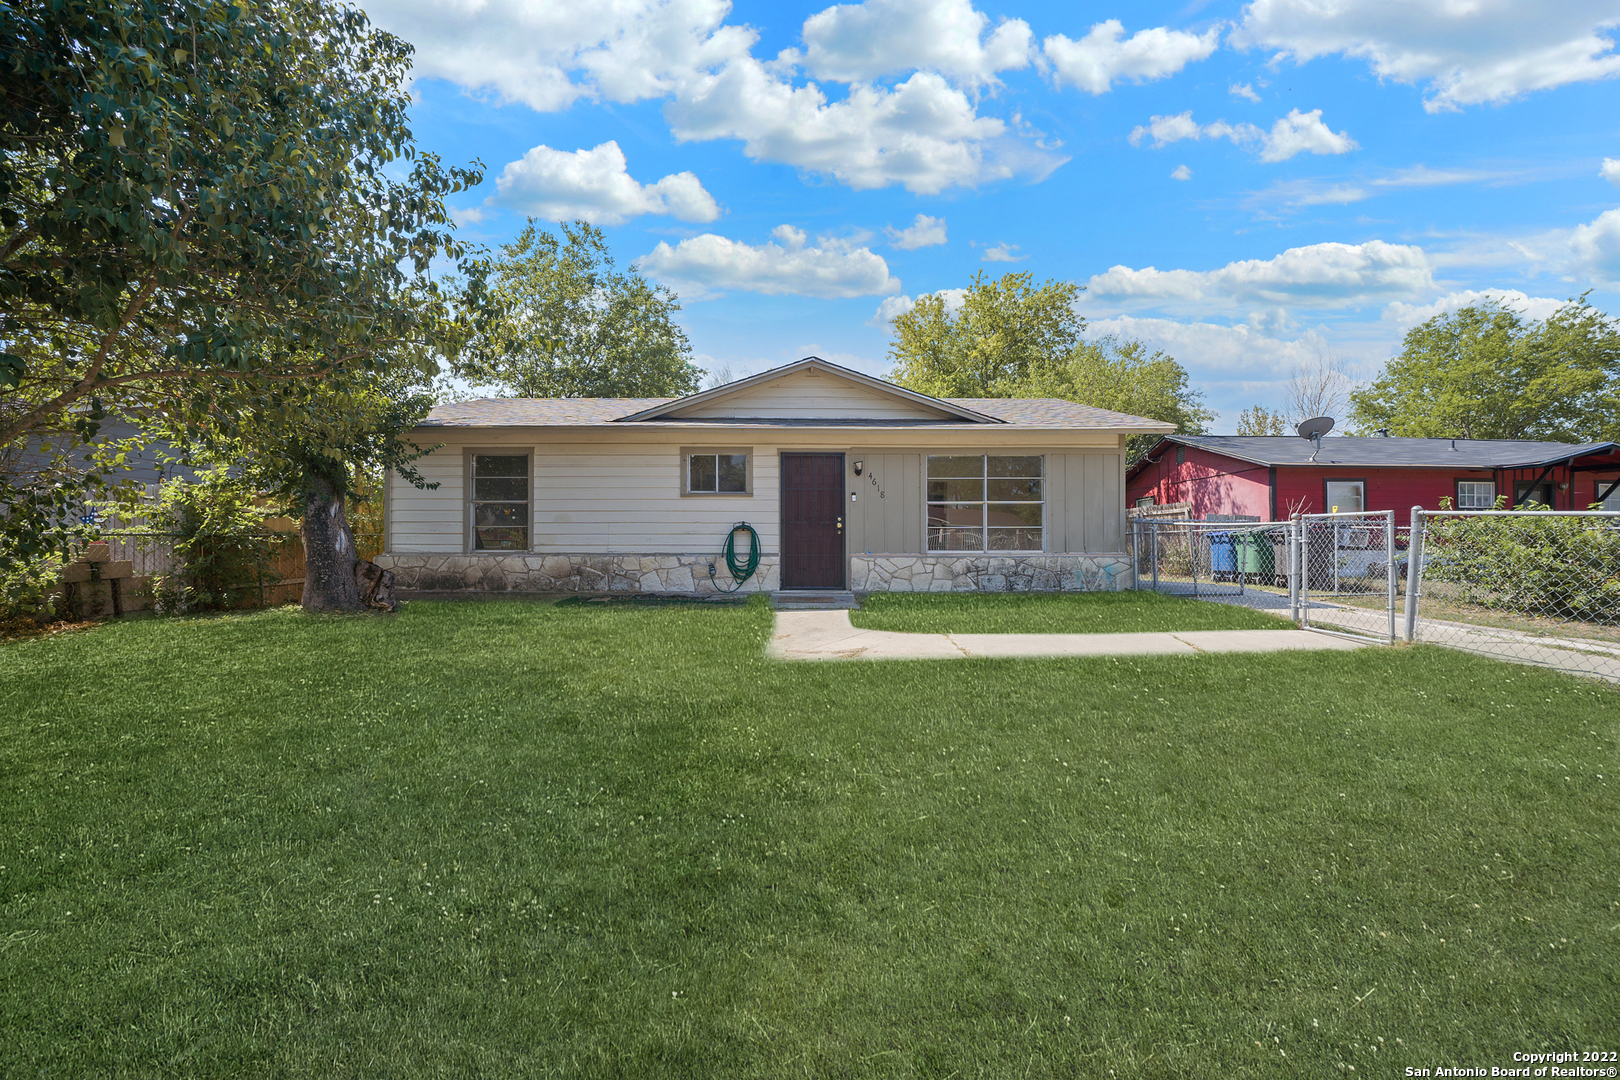 Charming 836 sqft home featuring 2 bed 1 bath located in Mission Heights. This modest home includes a separate living area and dining room, utility room with washer and dryer connections, and gas cooking. Conveniently located to Downtown, The Riverwalk, Lackland AFB and much more.